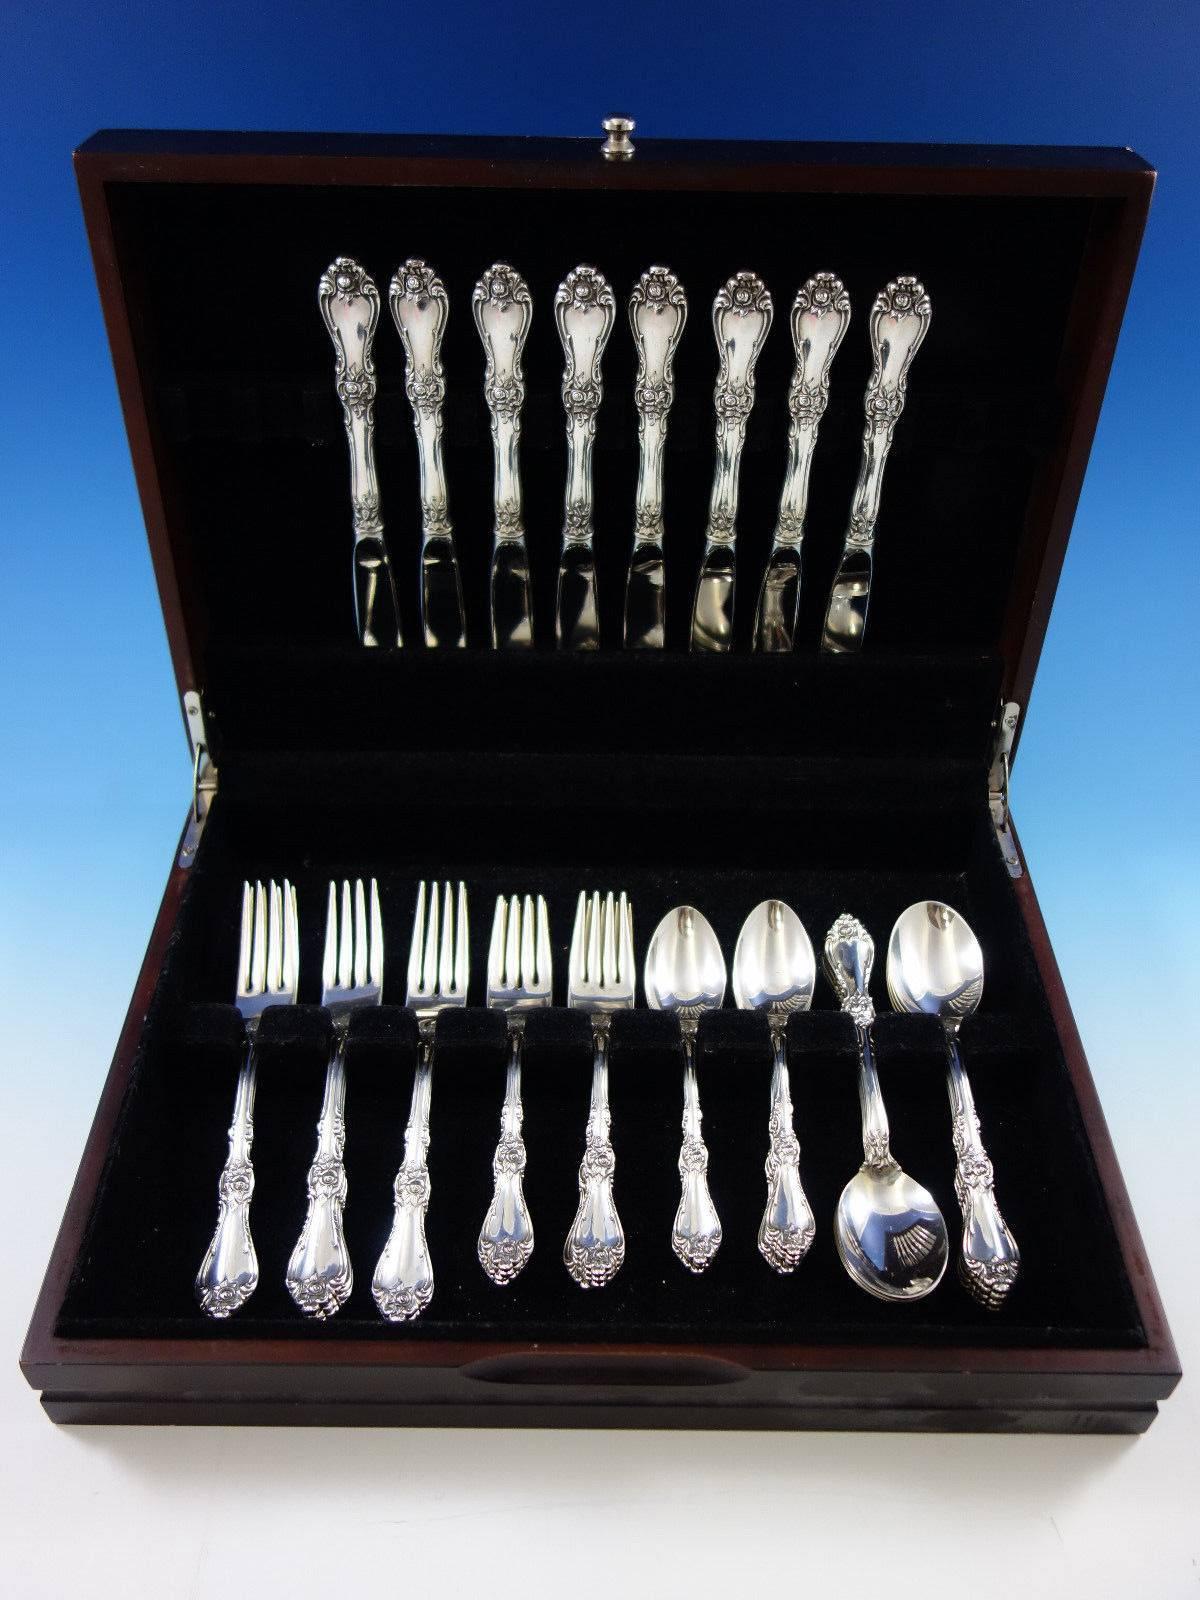 Royal Rose by Wallace sterling silver flatware set of 40 pieces. This set includes: 

Eight knives, 9